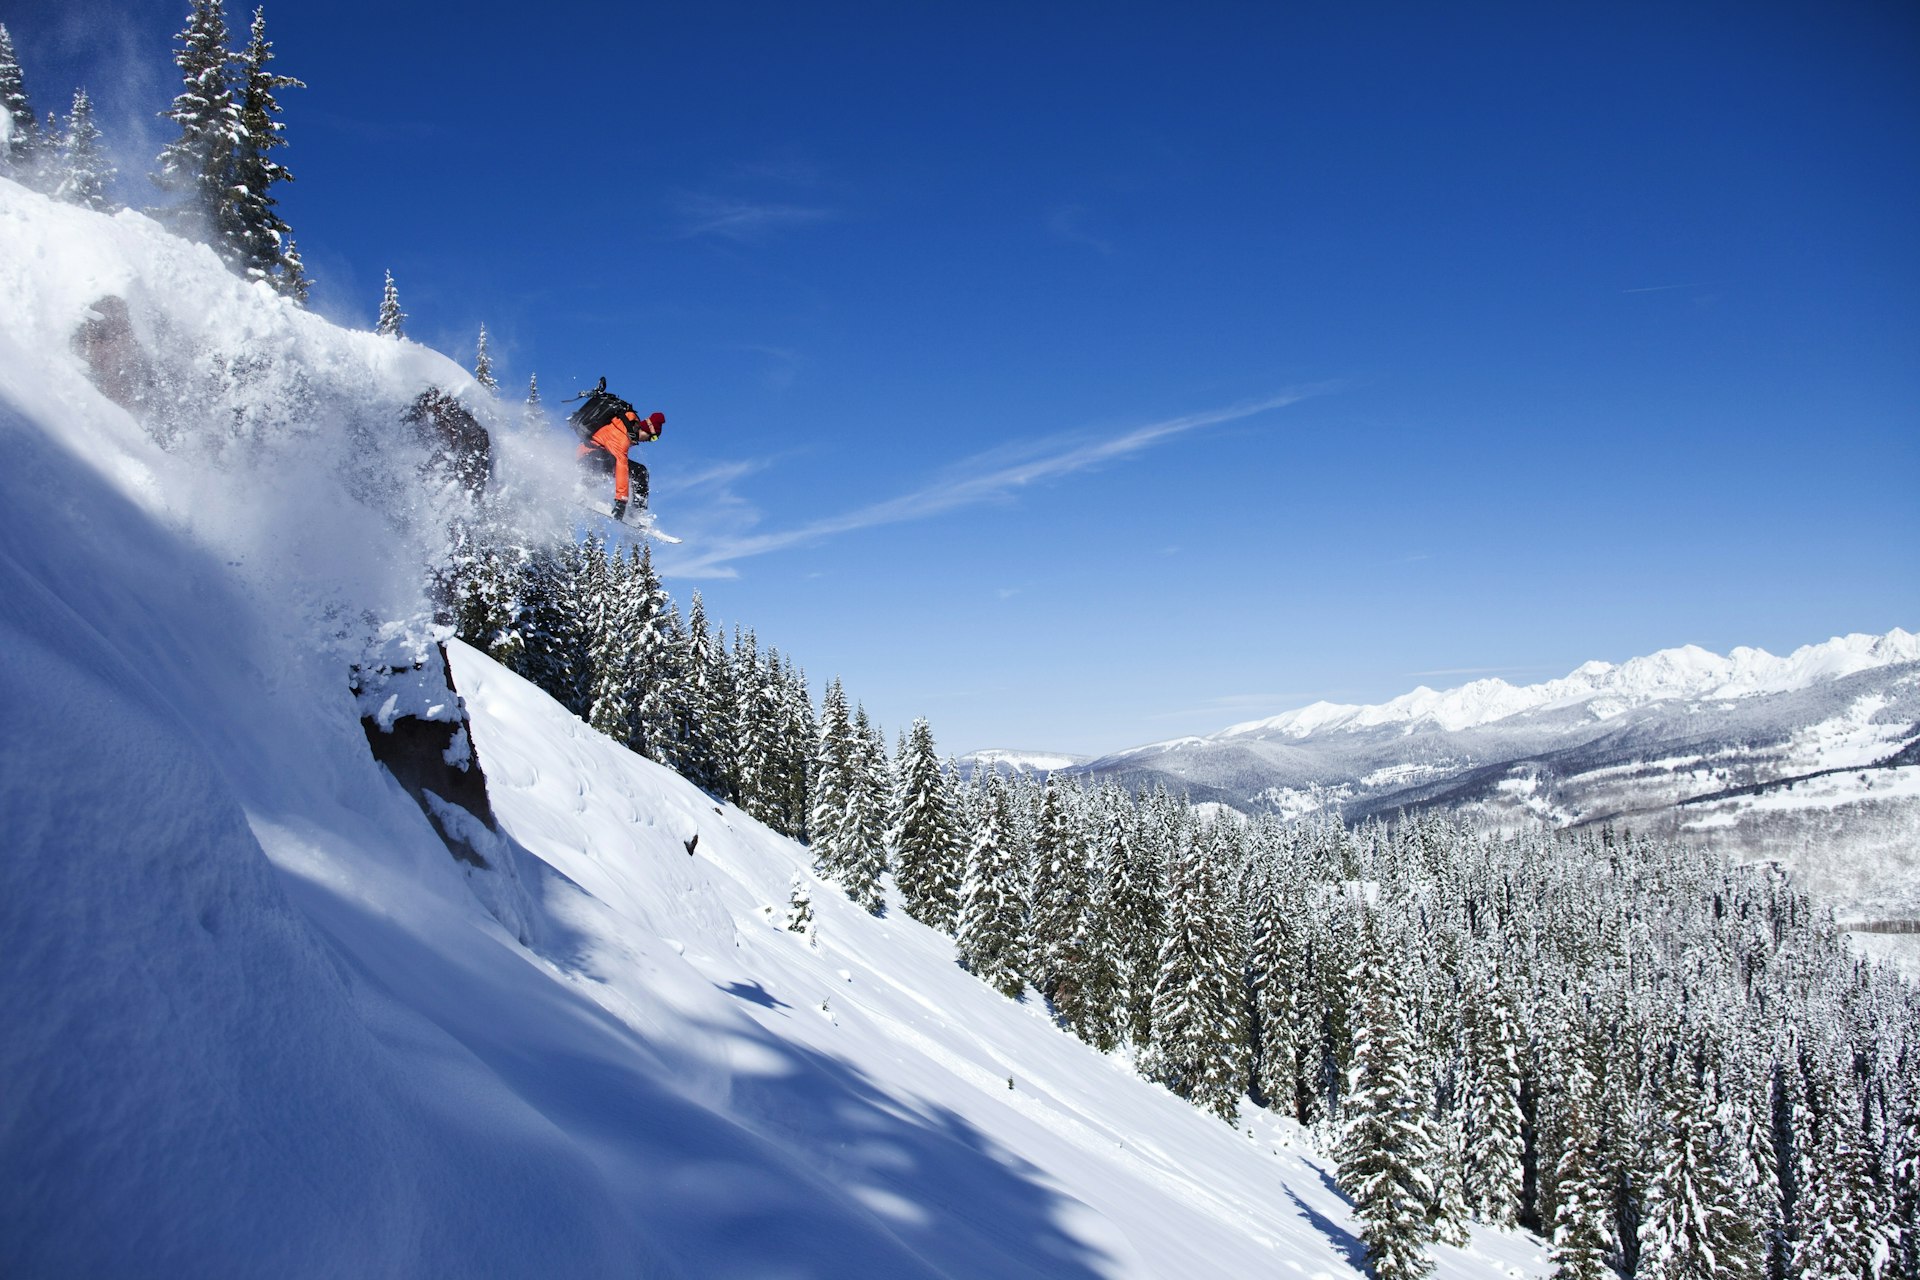 A athletic snowboarder jumping off a cliff on a sunny powder day in Colorado.